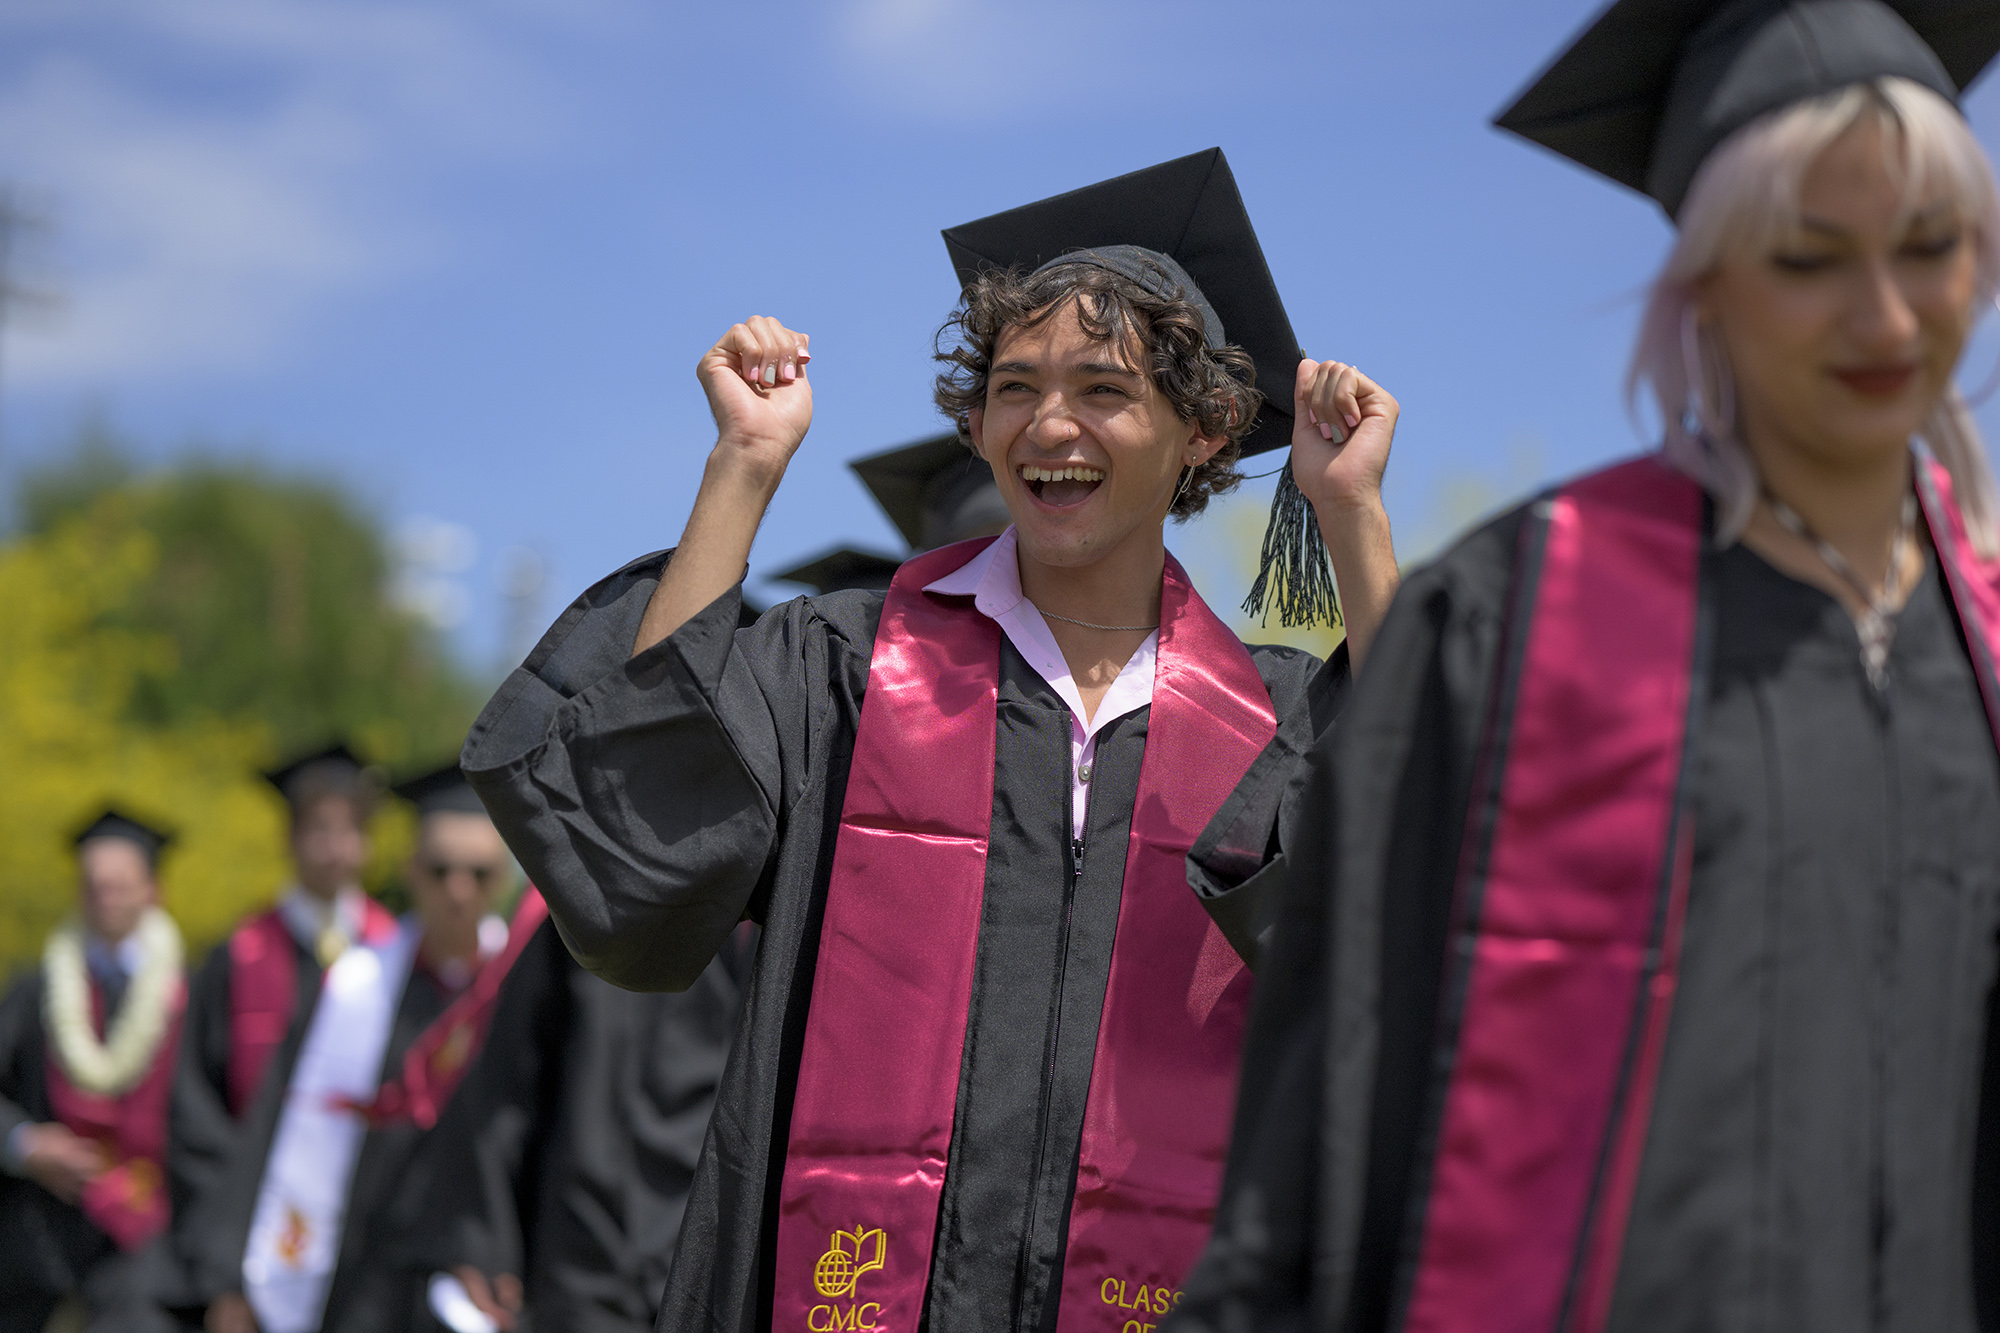 A CMC graduate pumps their fists as they proceed into the tent on Parents Field for 2022 Commencement.